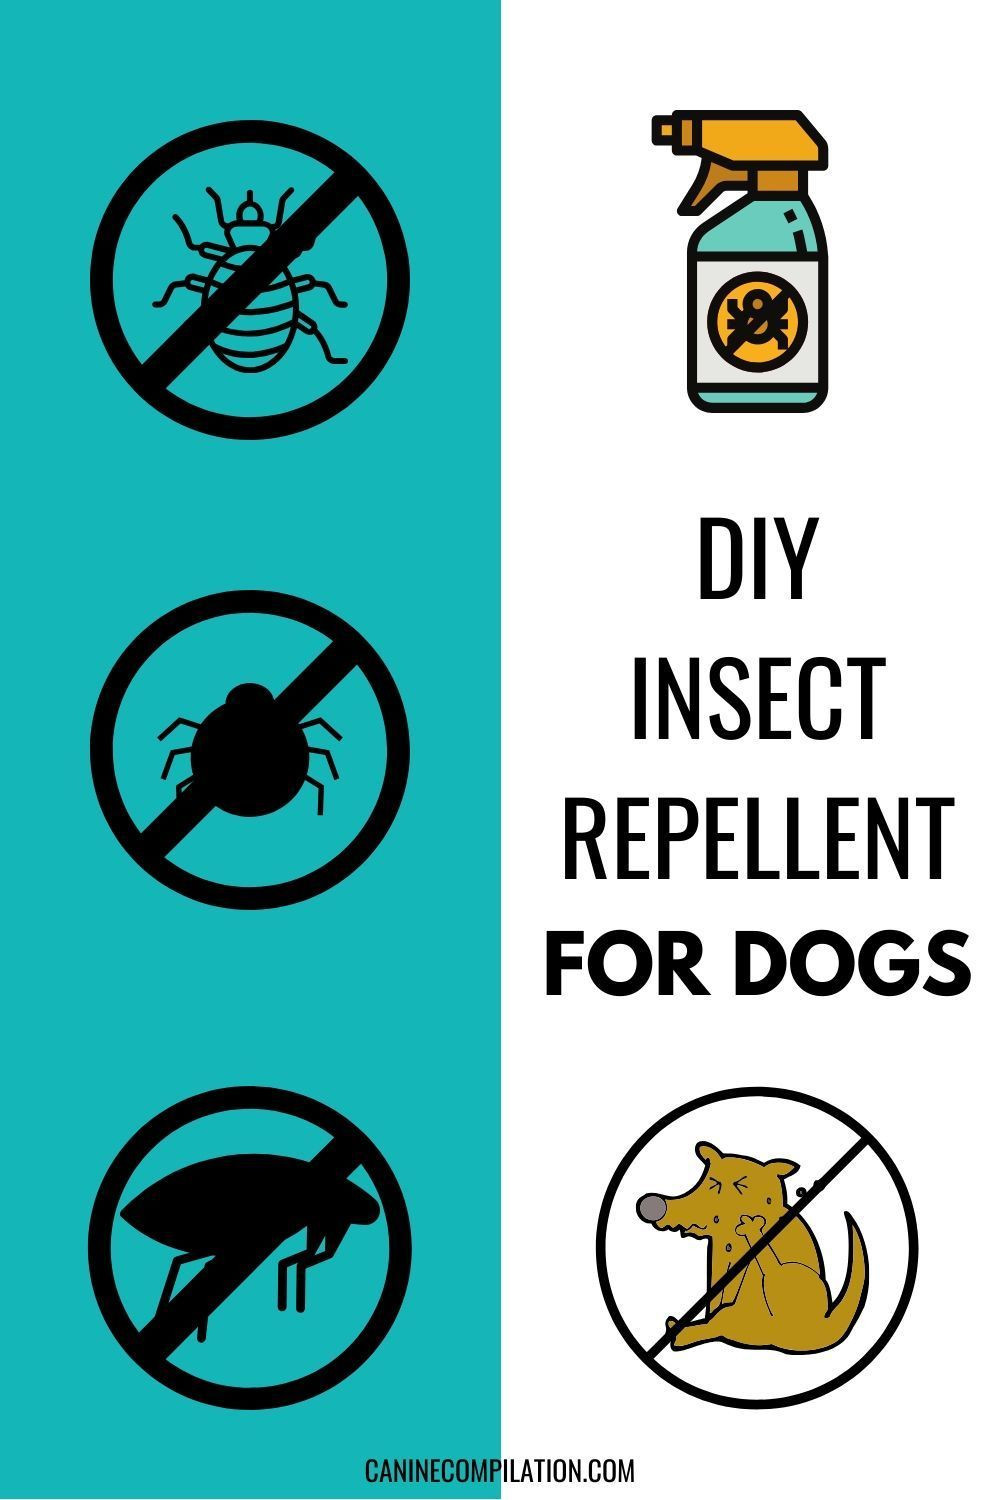 DIY Mosquito Repellent For Dogs
 DIY Bug Spray And Insect Repellents For Dogs canine